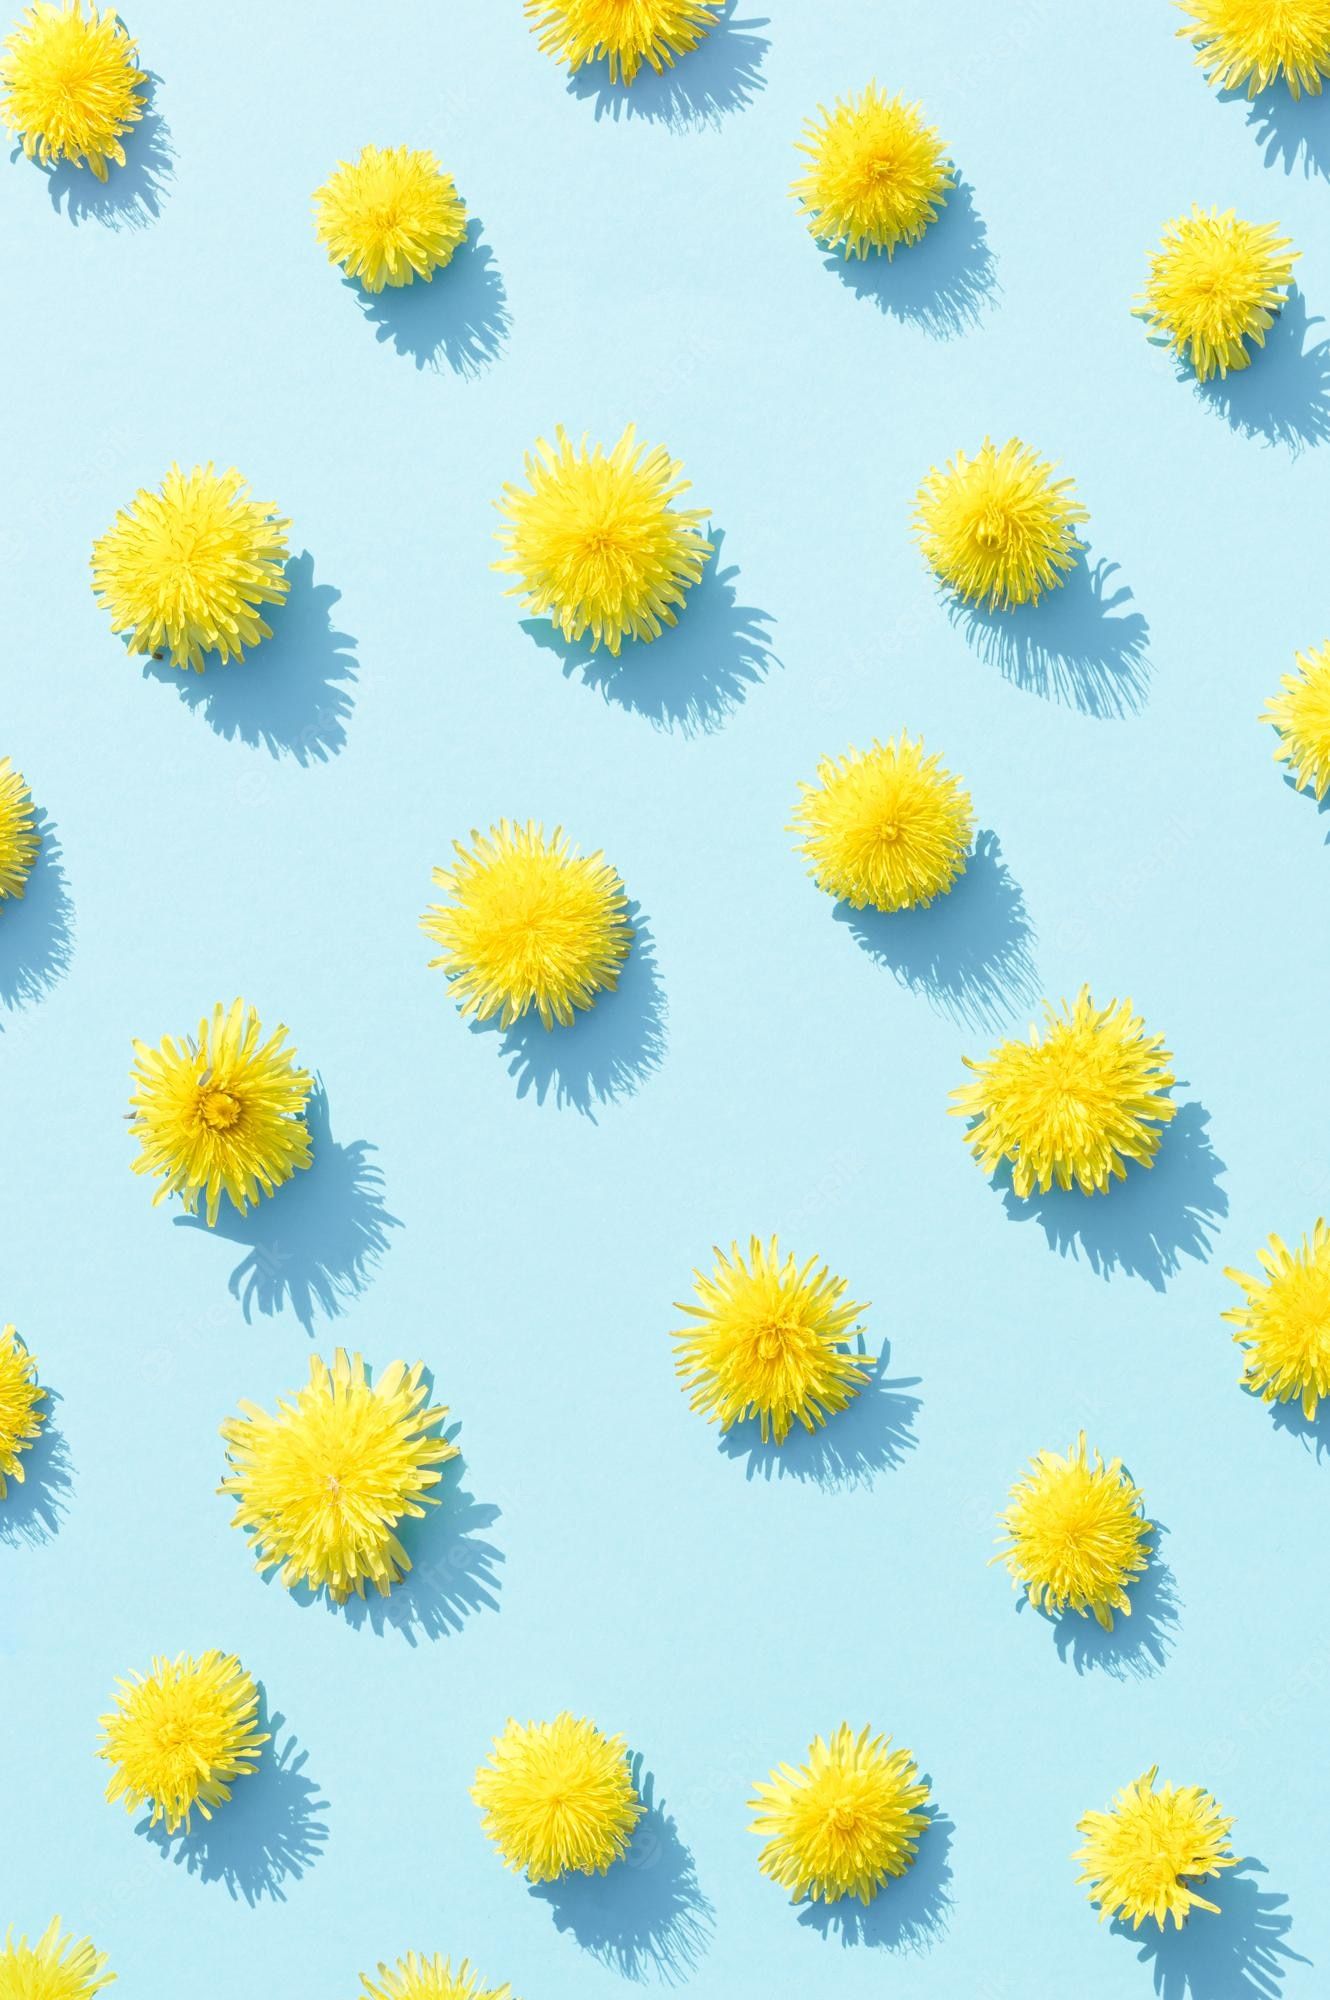 Premium Photo. Yellow dandelion spring flower on a pastel blue background floral aesthetic summer wallpaper